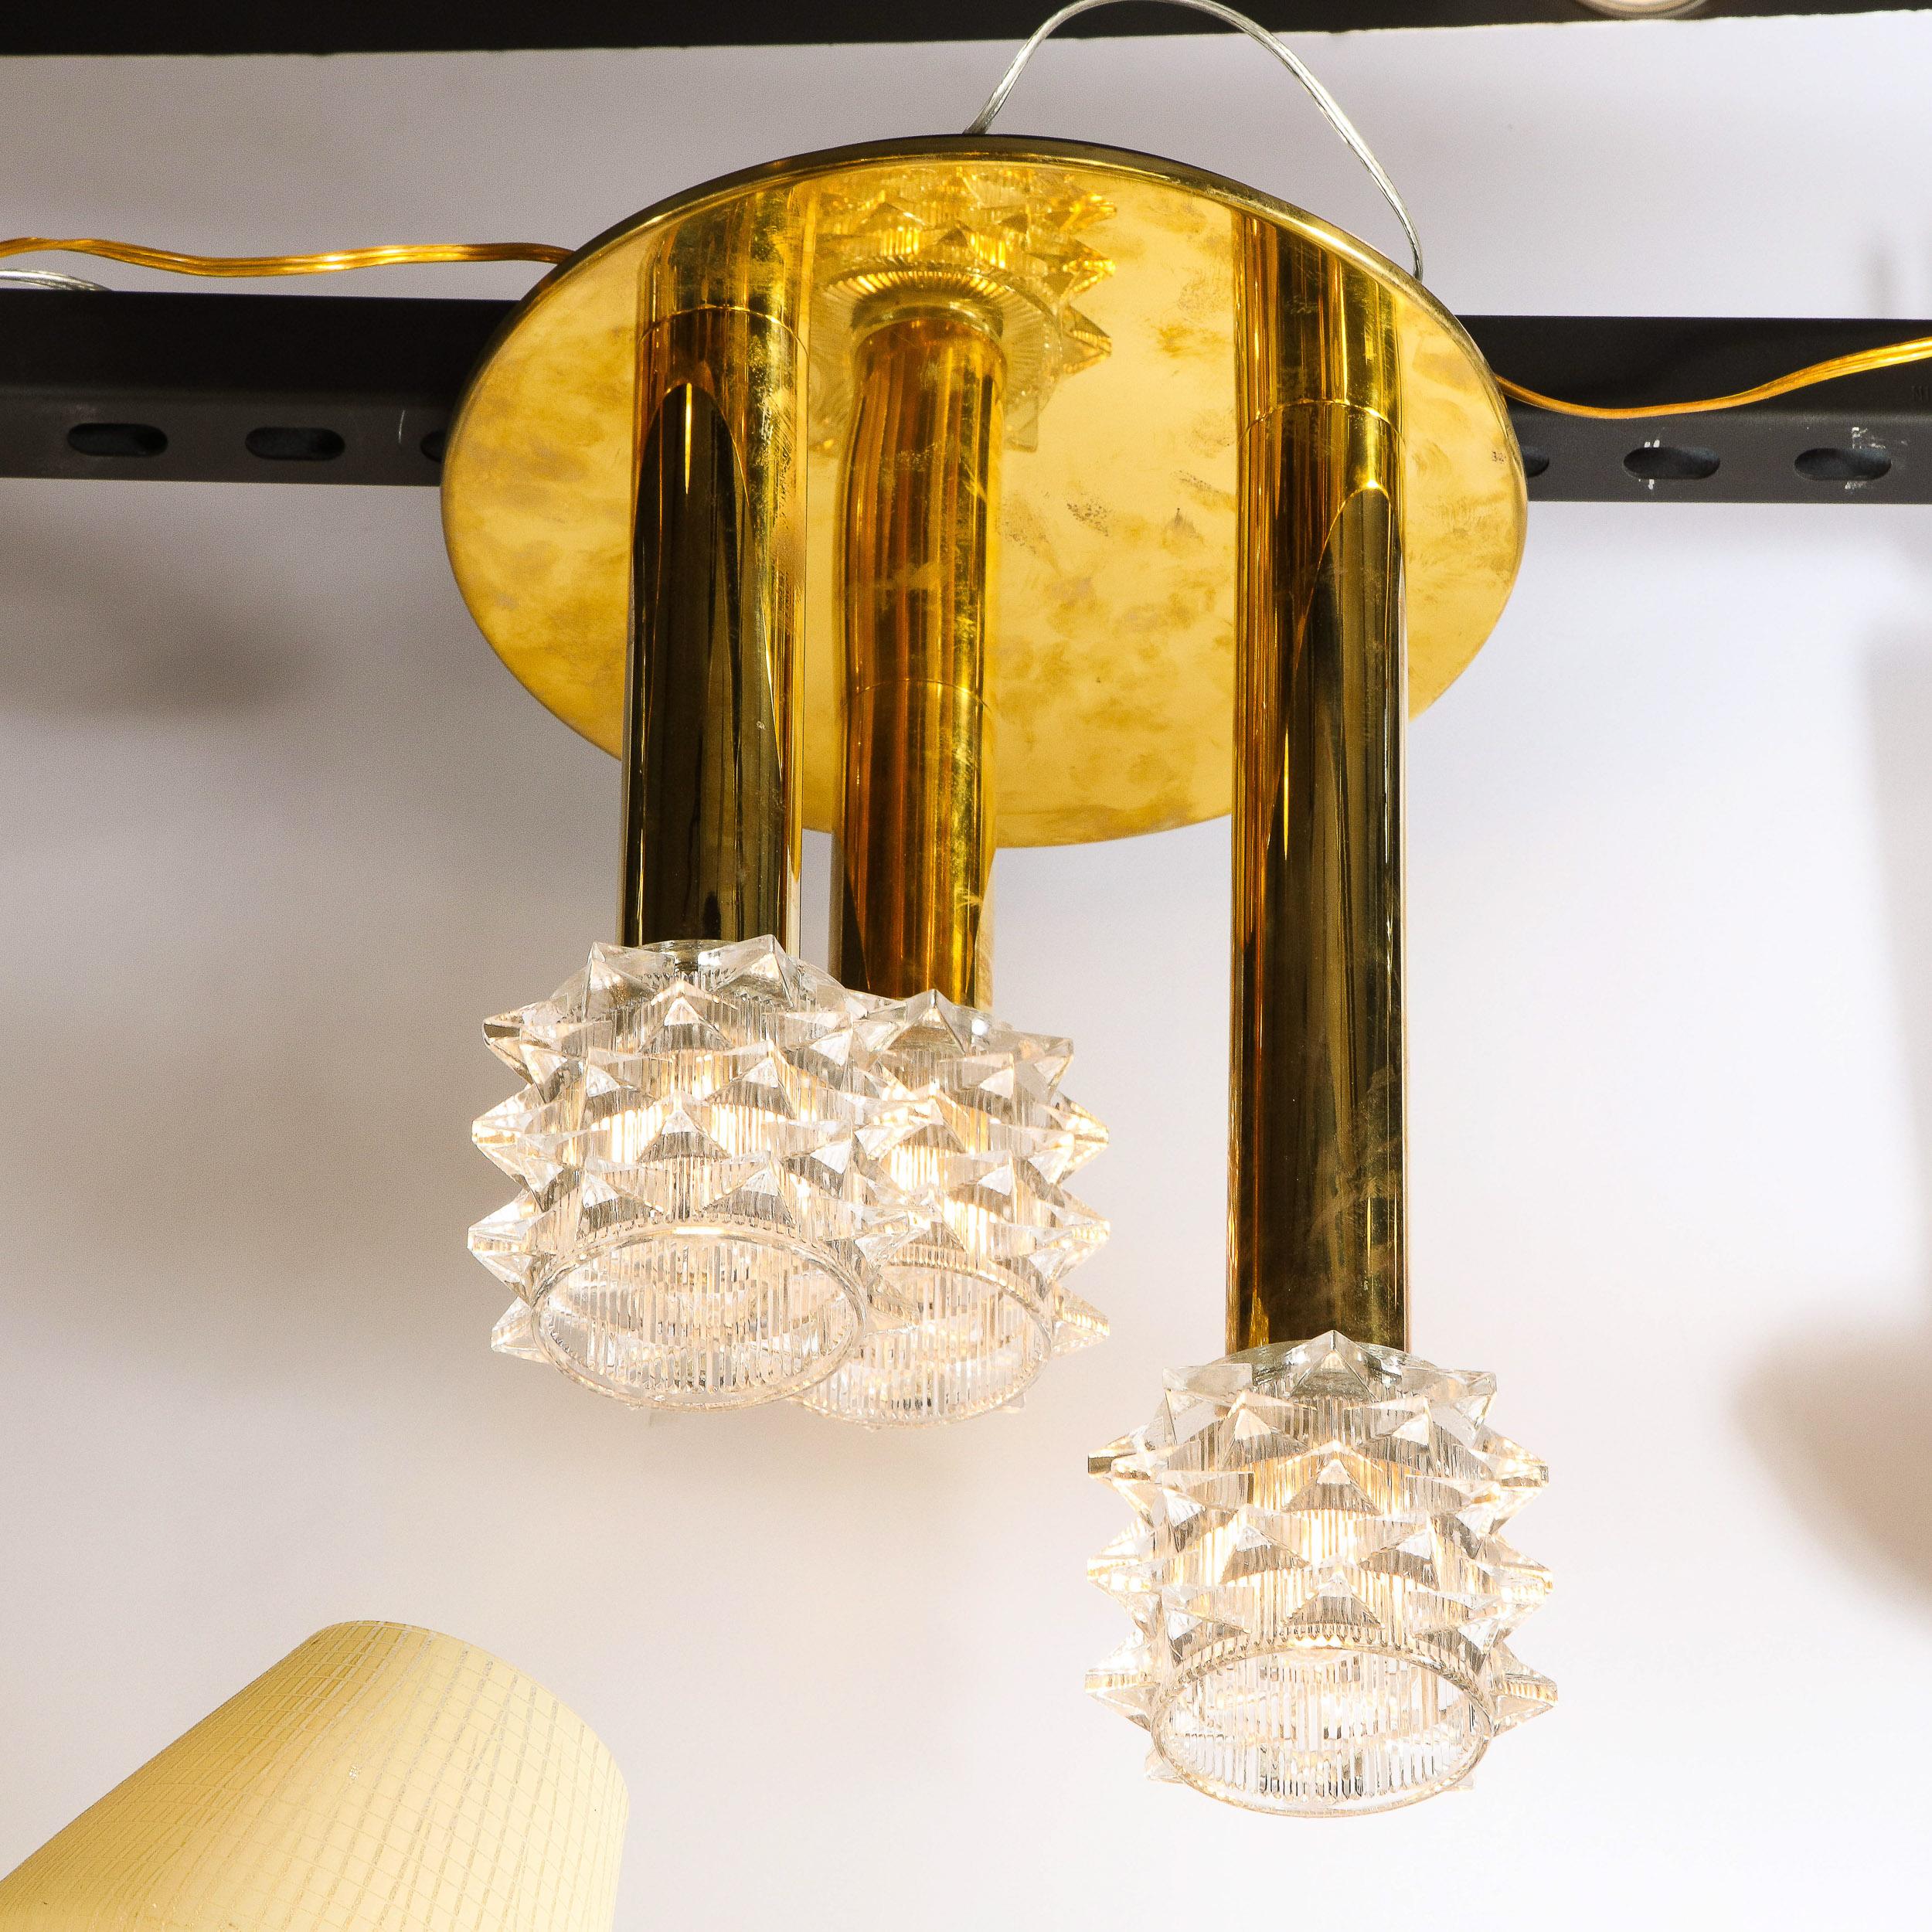 German Mid-Century Modern Staggered Three Arm Polished Brass & Faceted Glass Chandelier For Sale